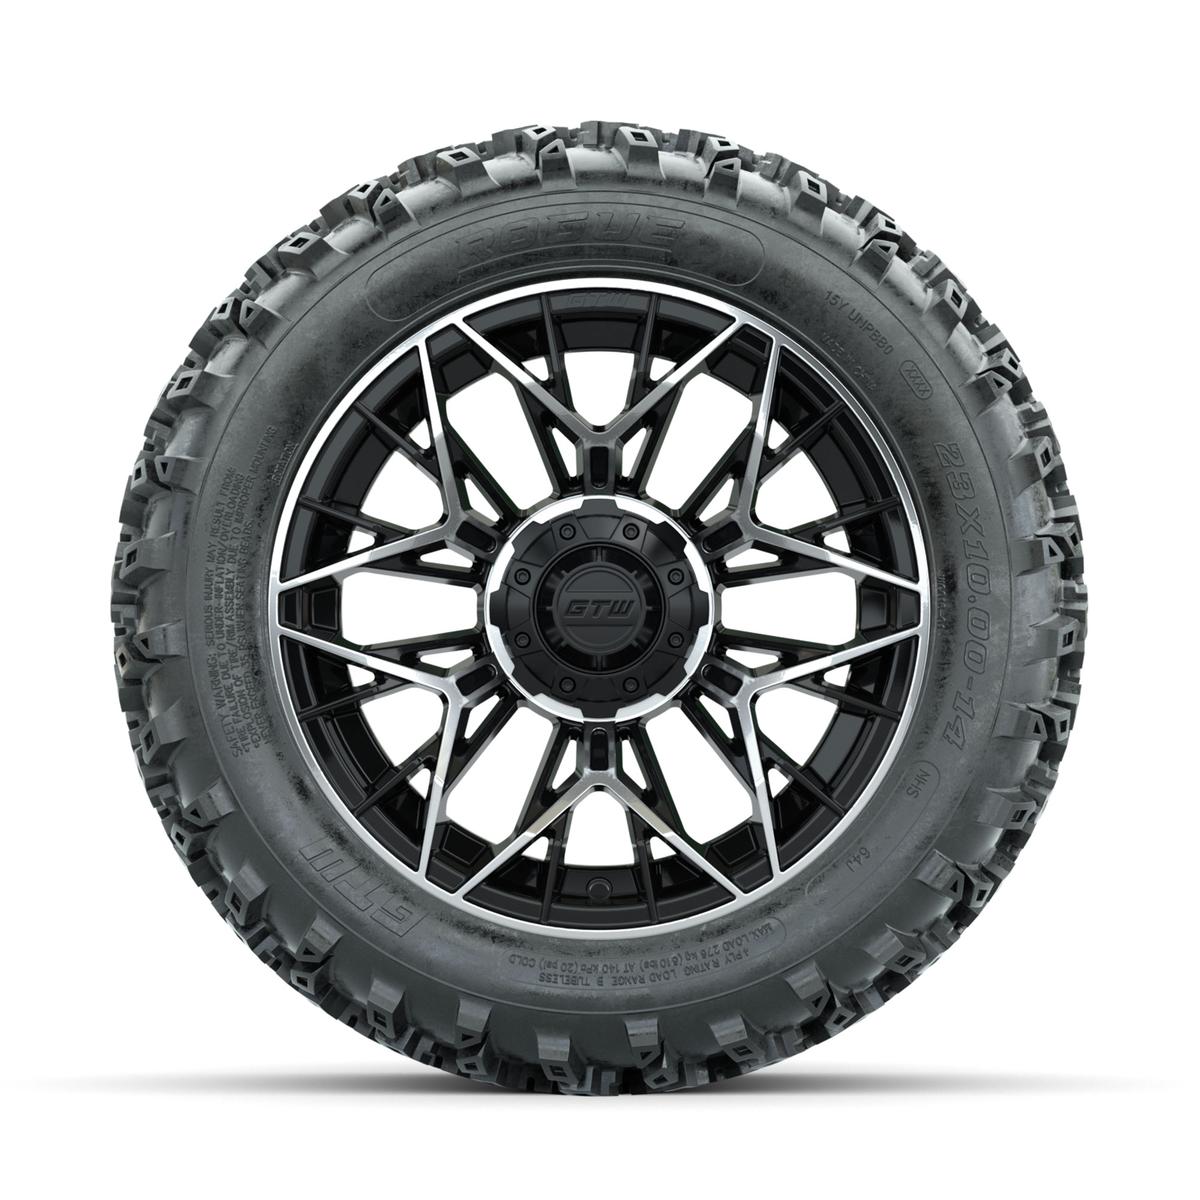 GTW Stellar Machined/Black 14 in Wheels with 23x10.00-14 Rogue All Terrain Tires – Full Set